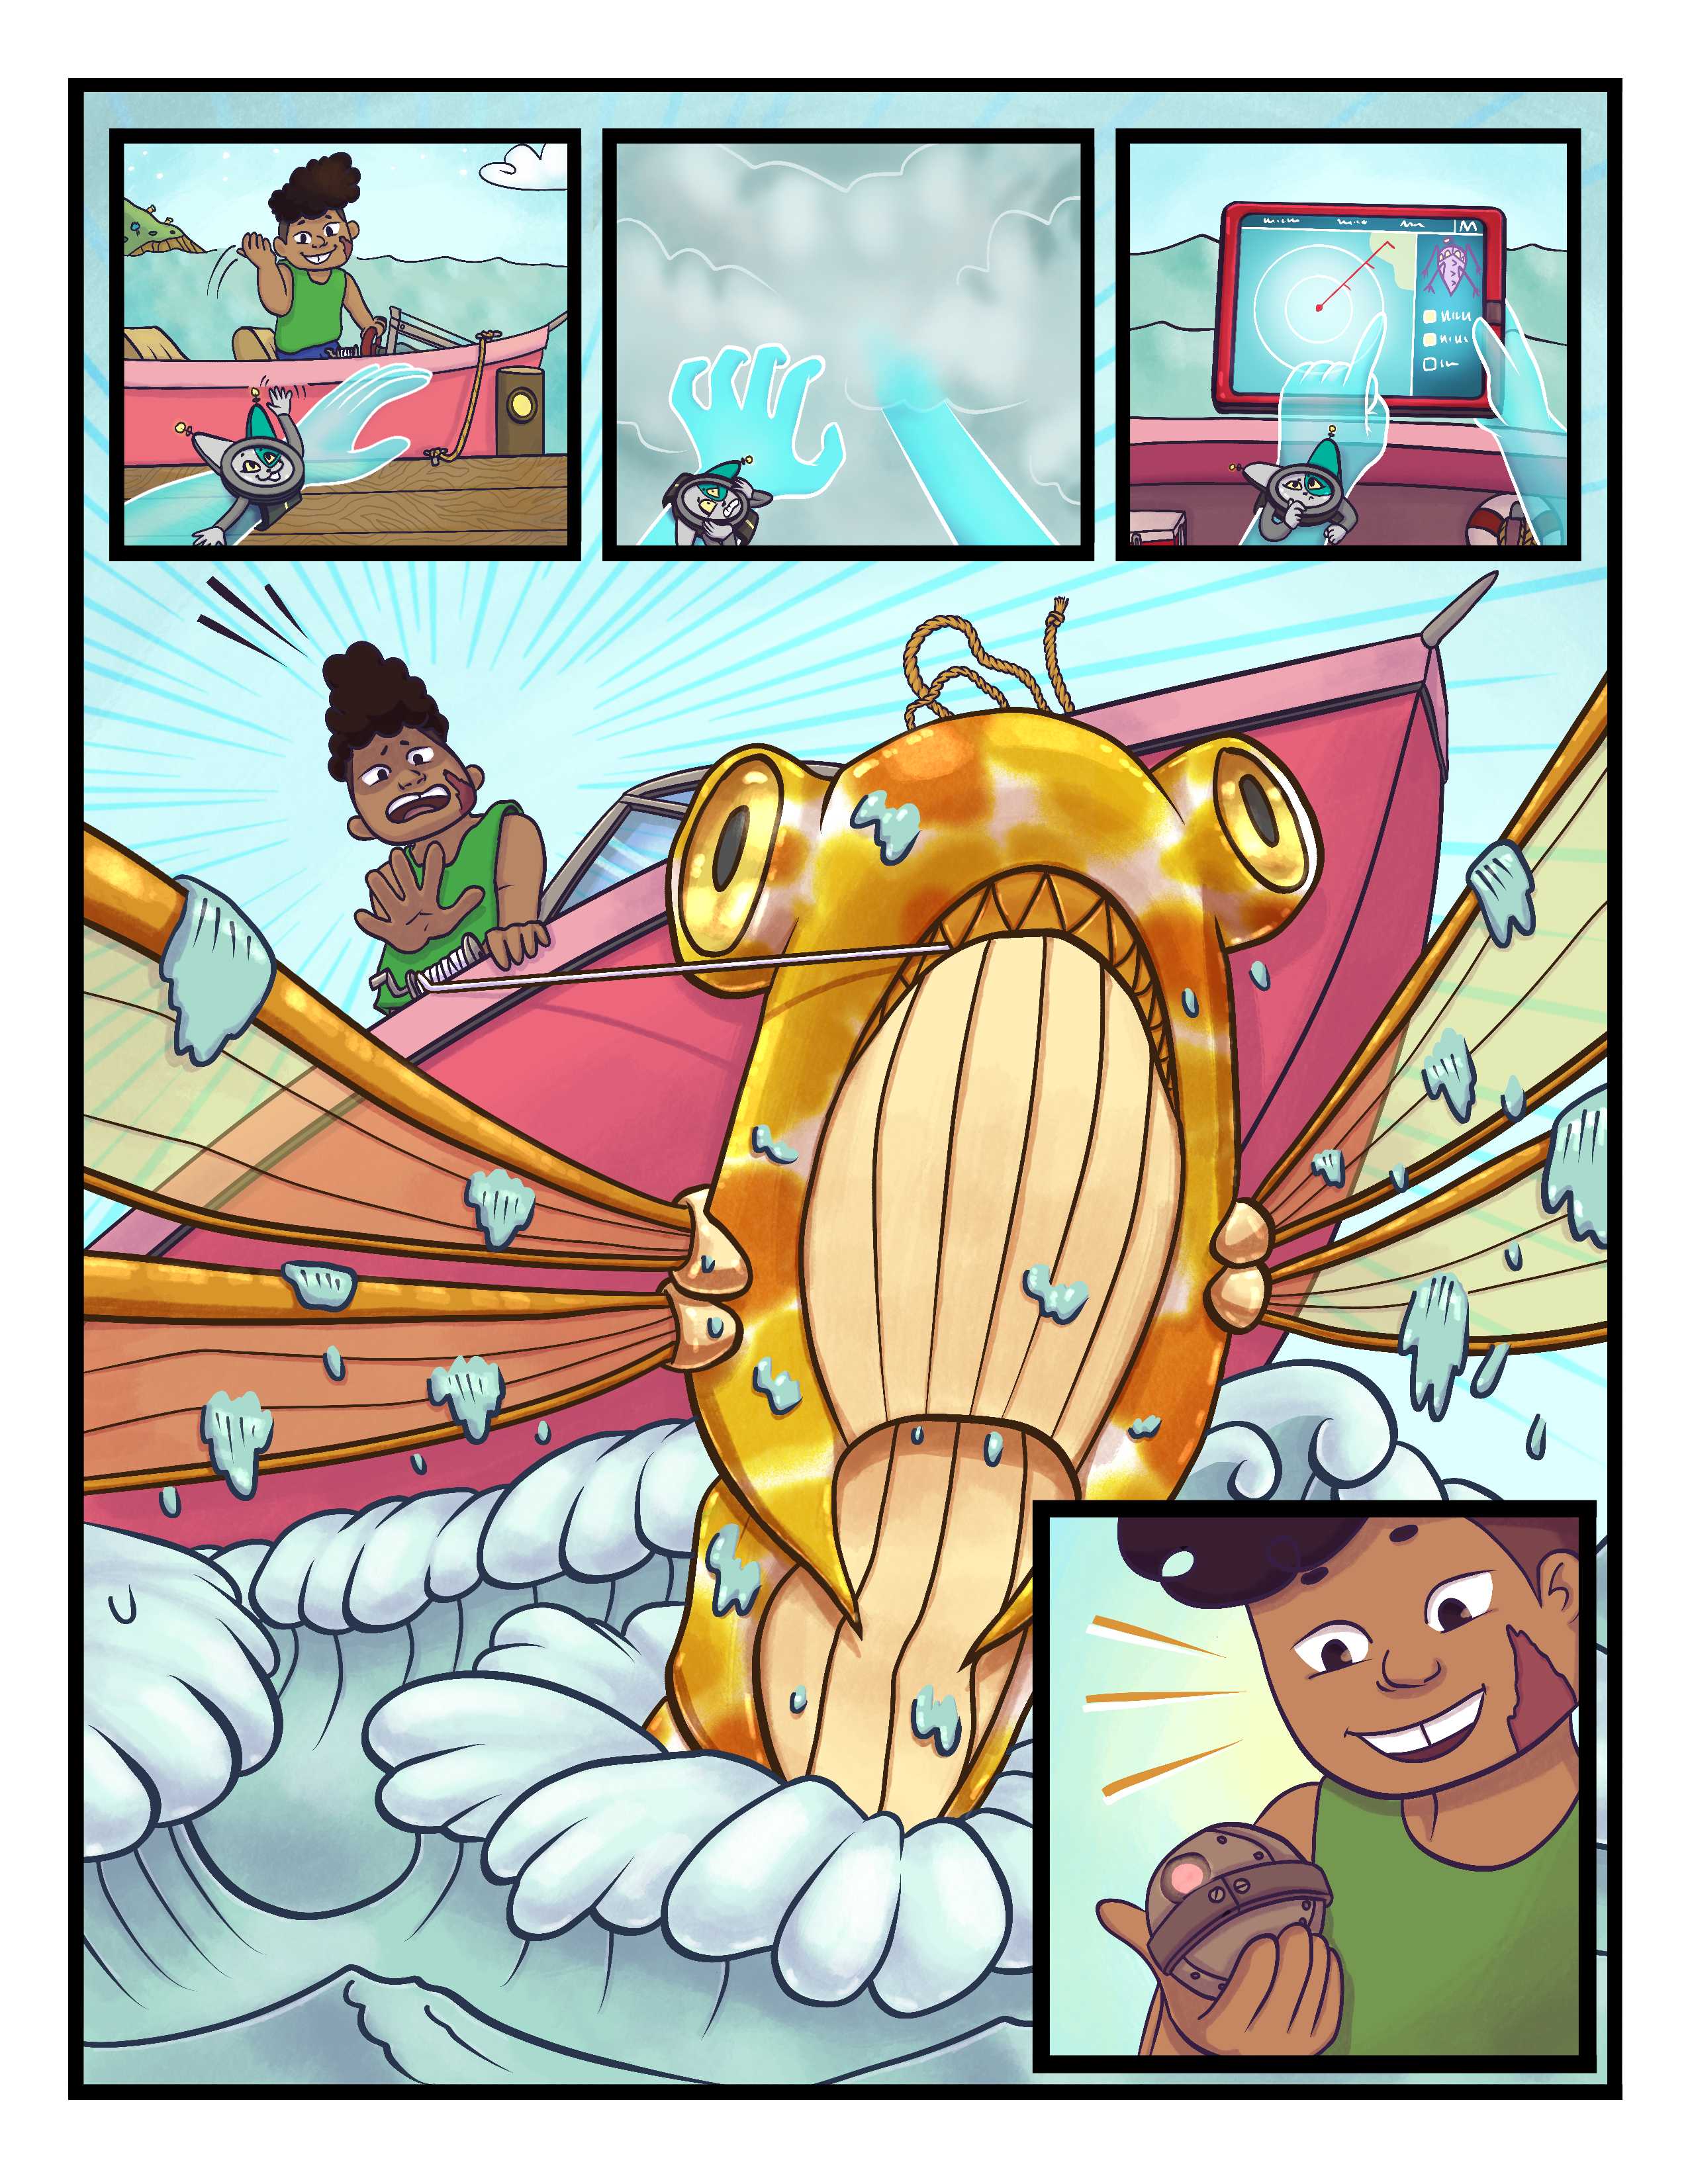 The device success version of the Docks comic page!